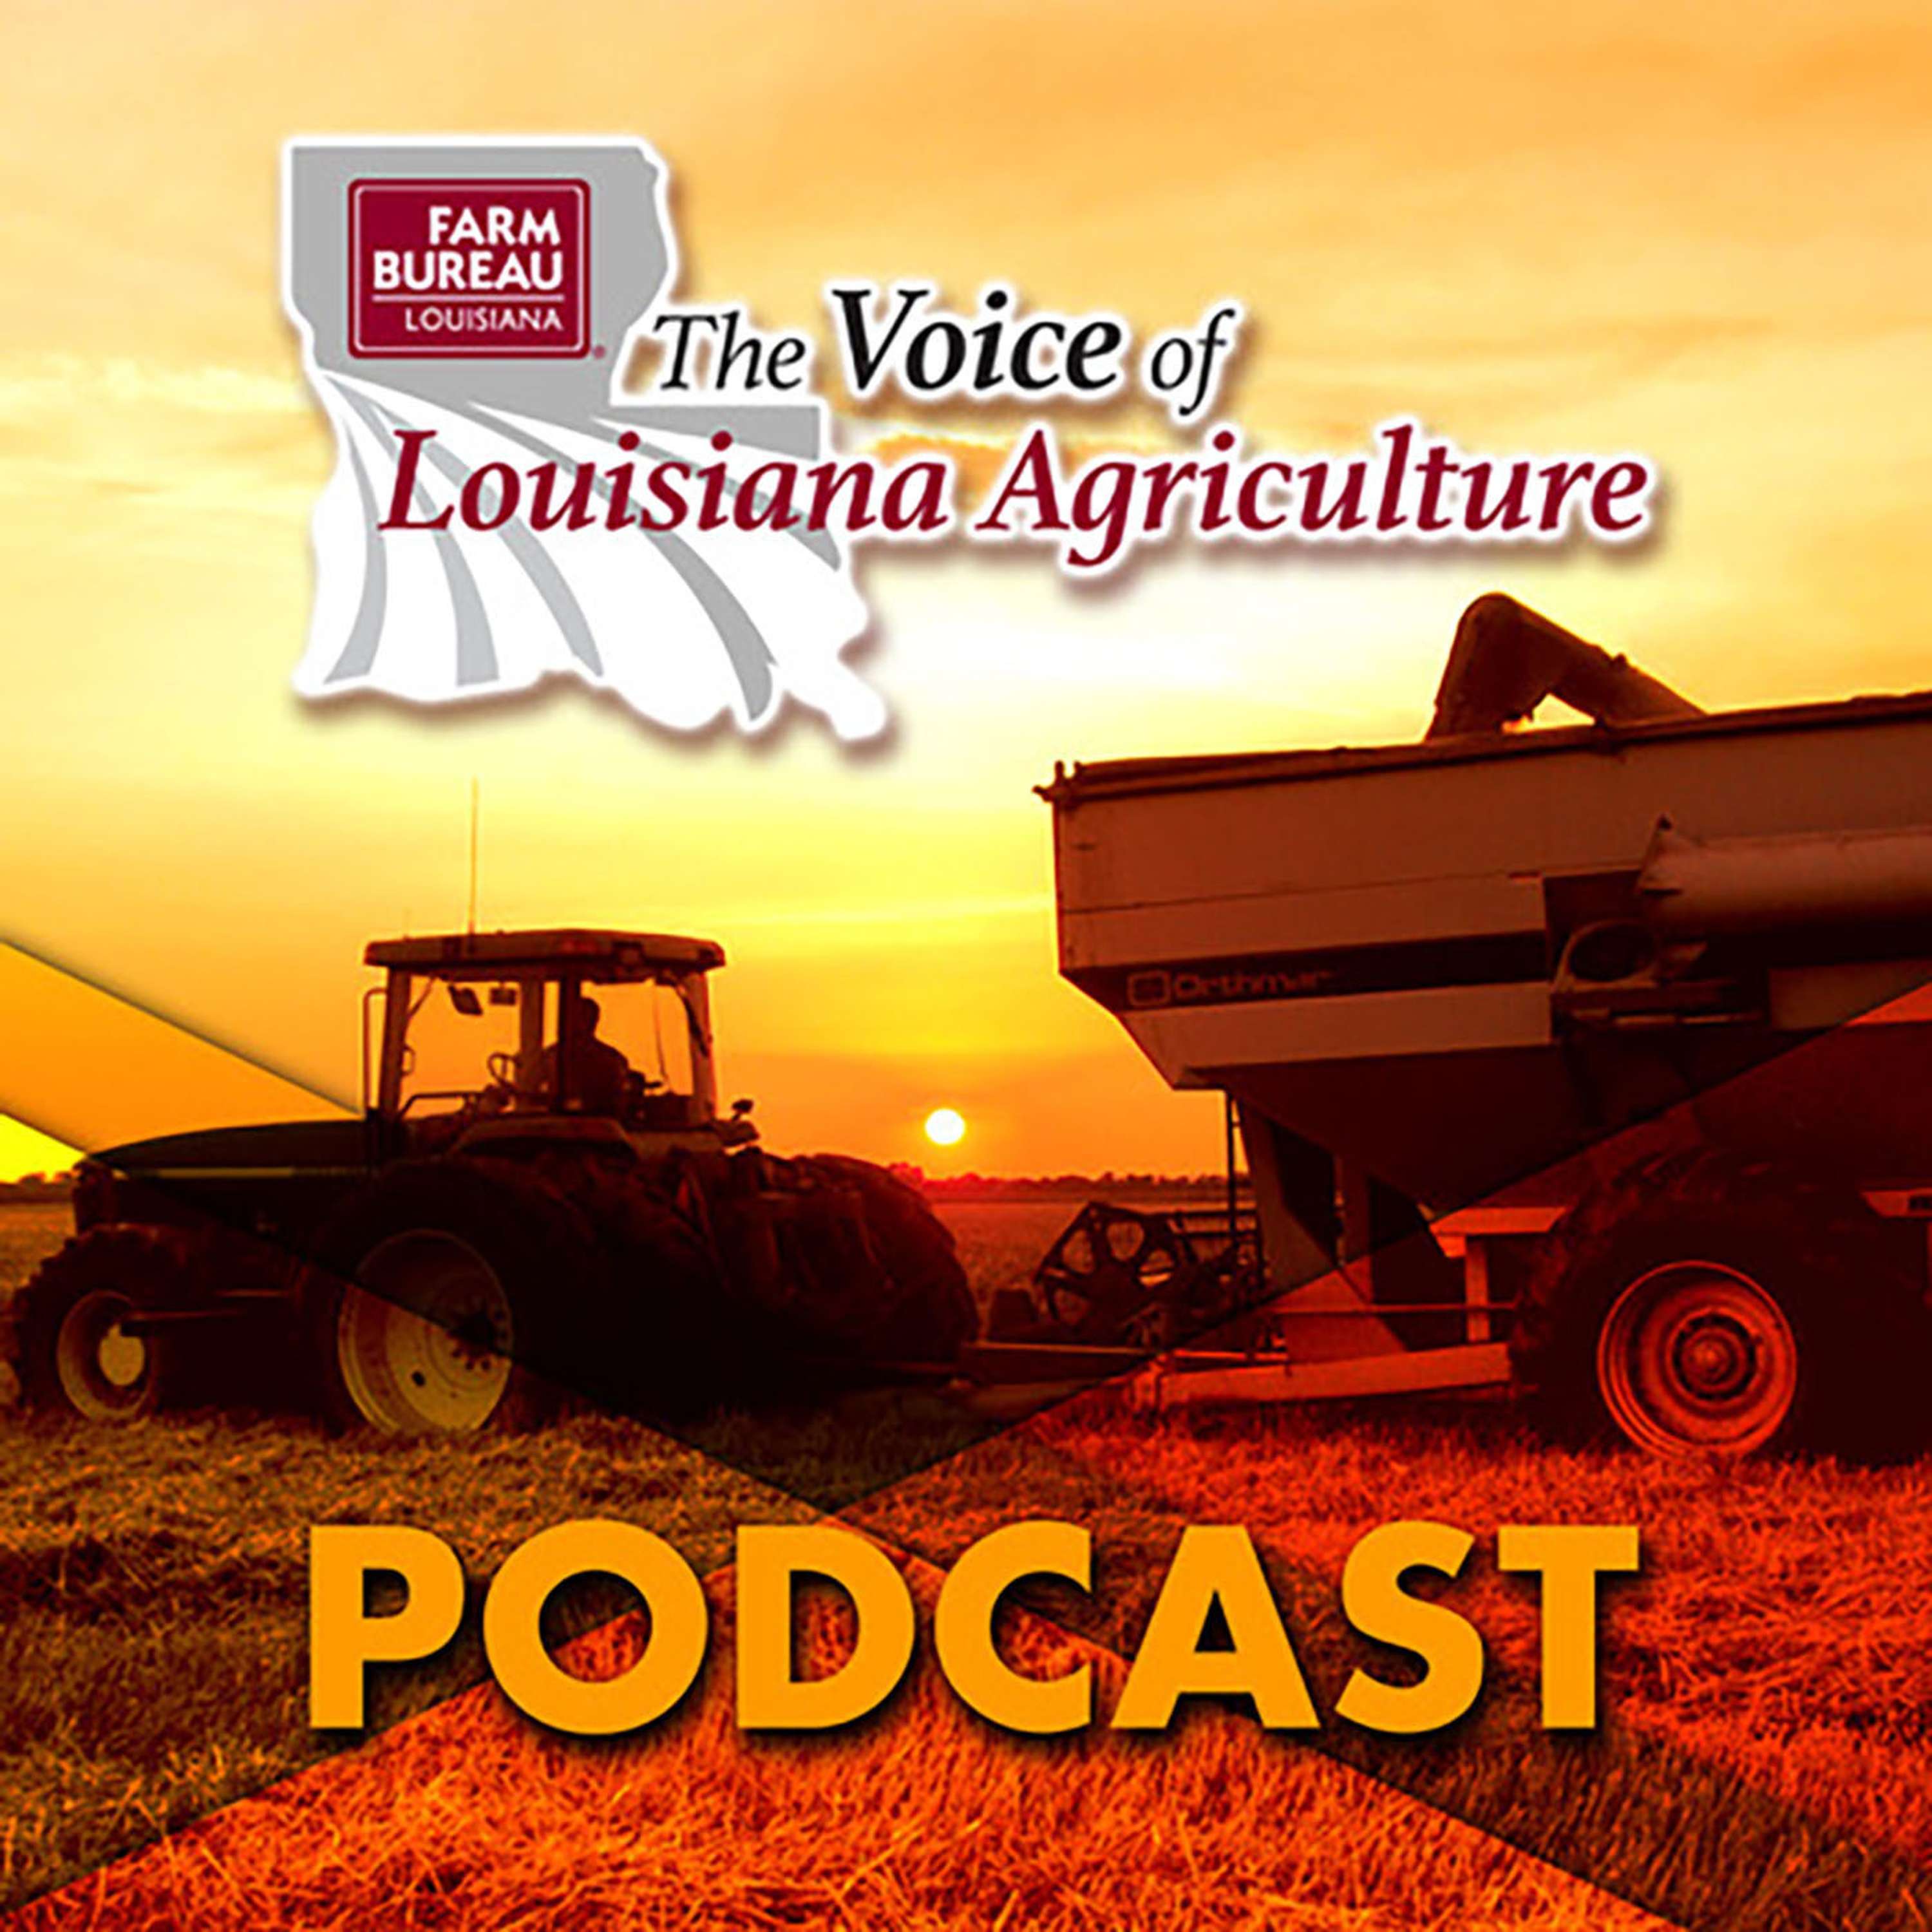 The Voice of Louisiana Agriculture Podcast #28 - March 15, 2019